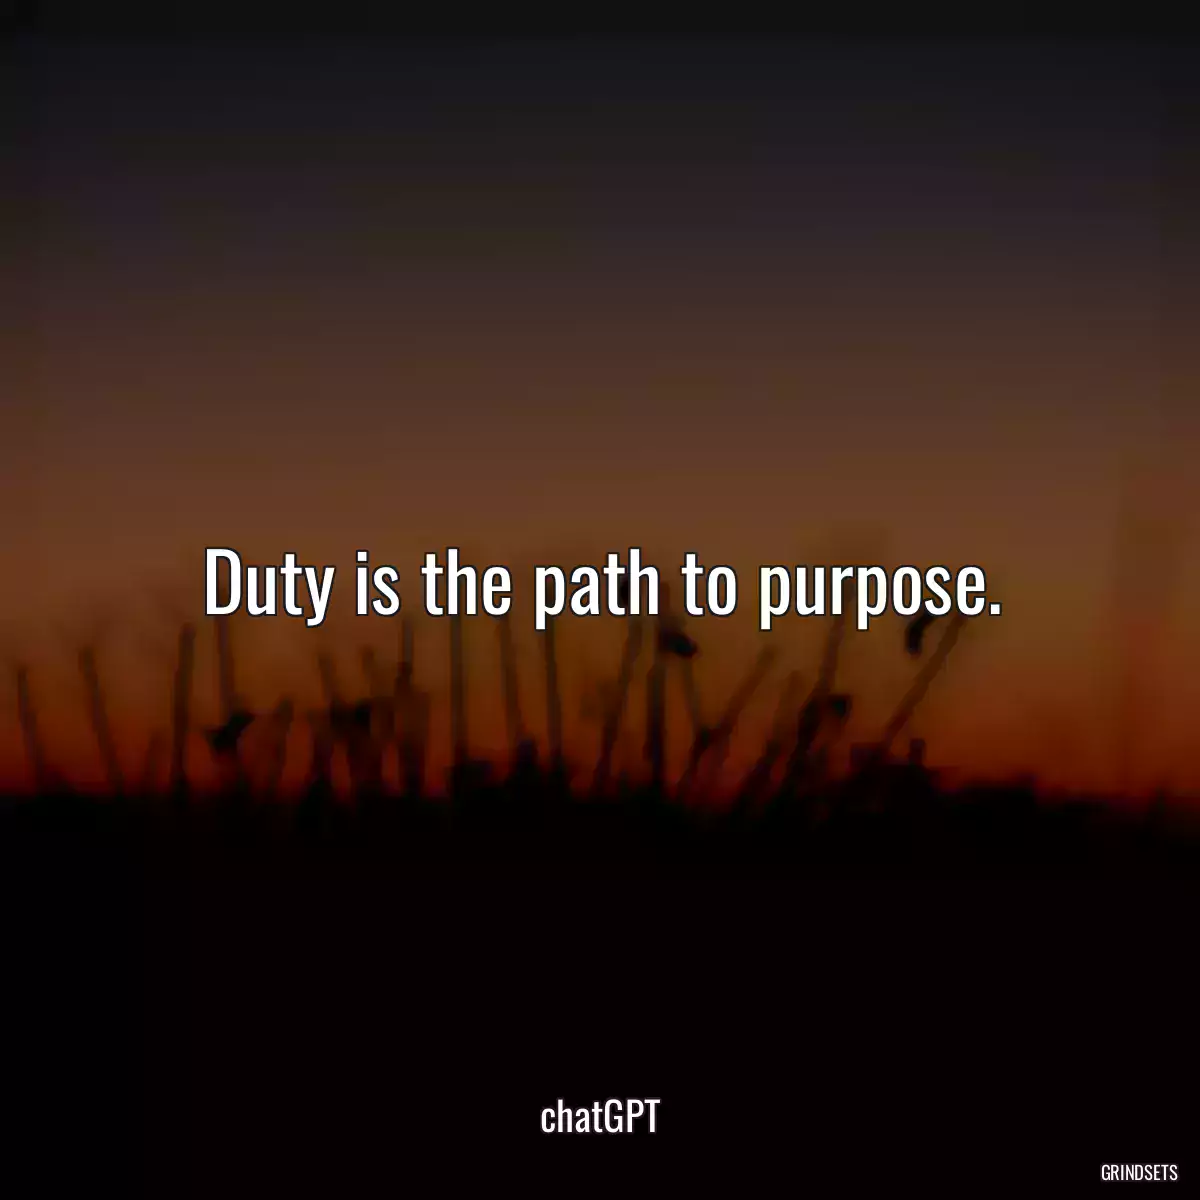 Duty is the path to purpose.